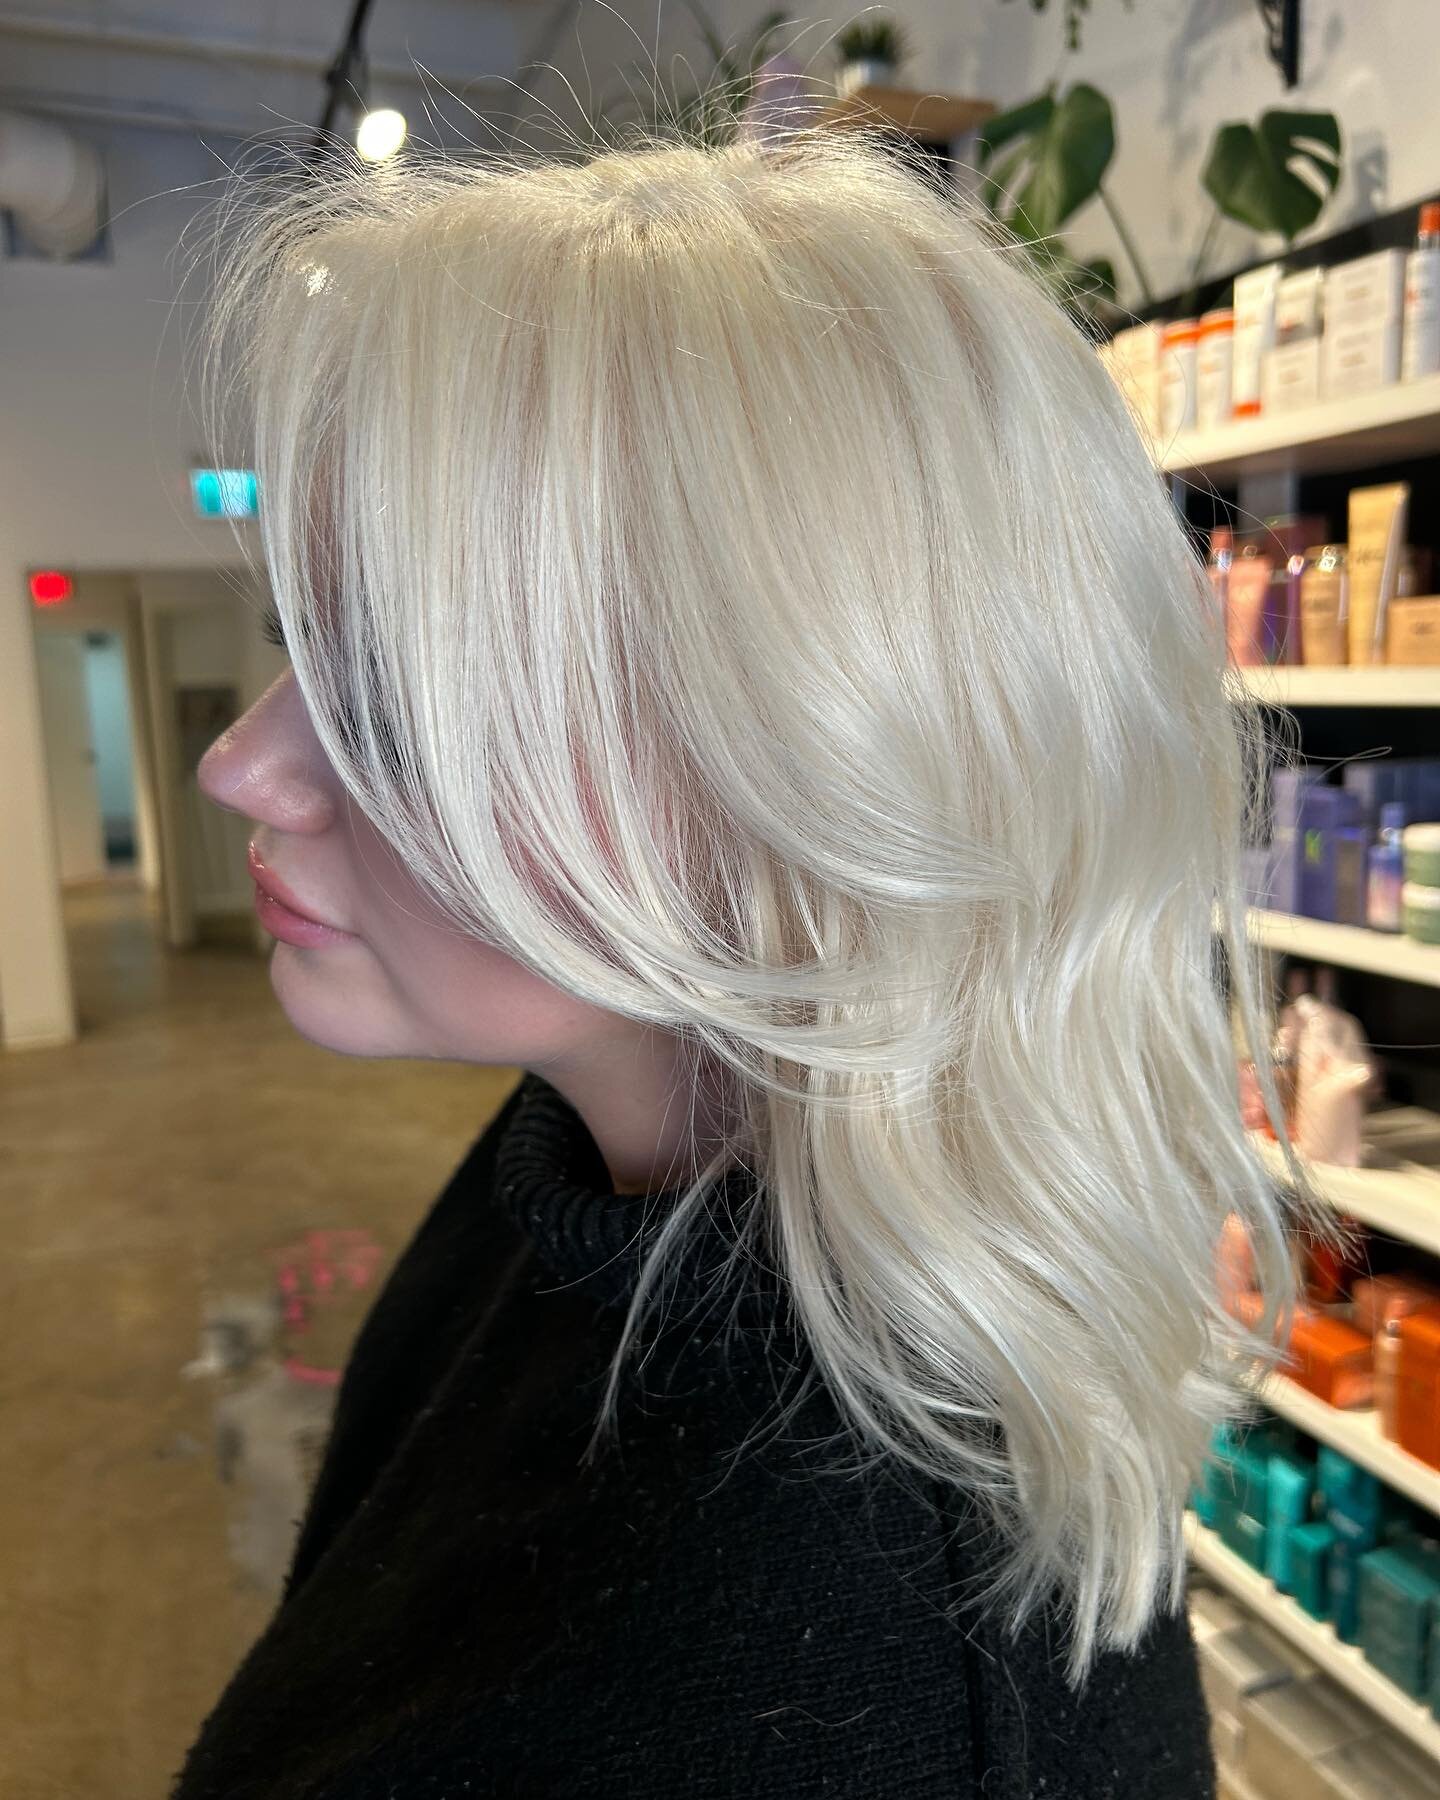 No Toner Needed For This Creamy Blonde?!🤫🤍

@brianna._.layne always works her magic on our girl @micah.alex and the results NEVER disappoint!

there was no toner used this time because of how perfect her hair looked post bleach &amp; @kerastase_off